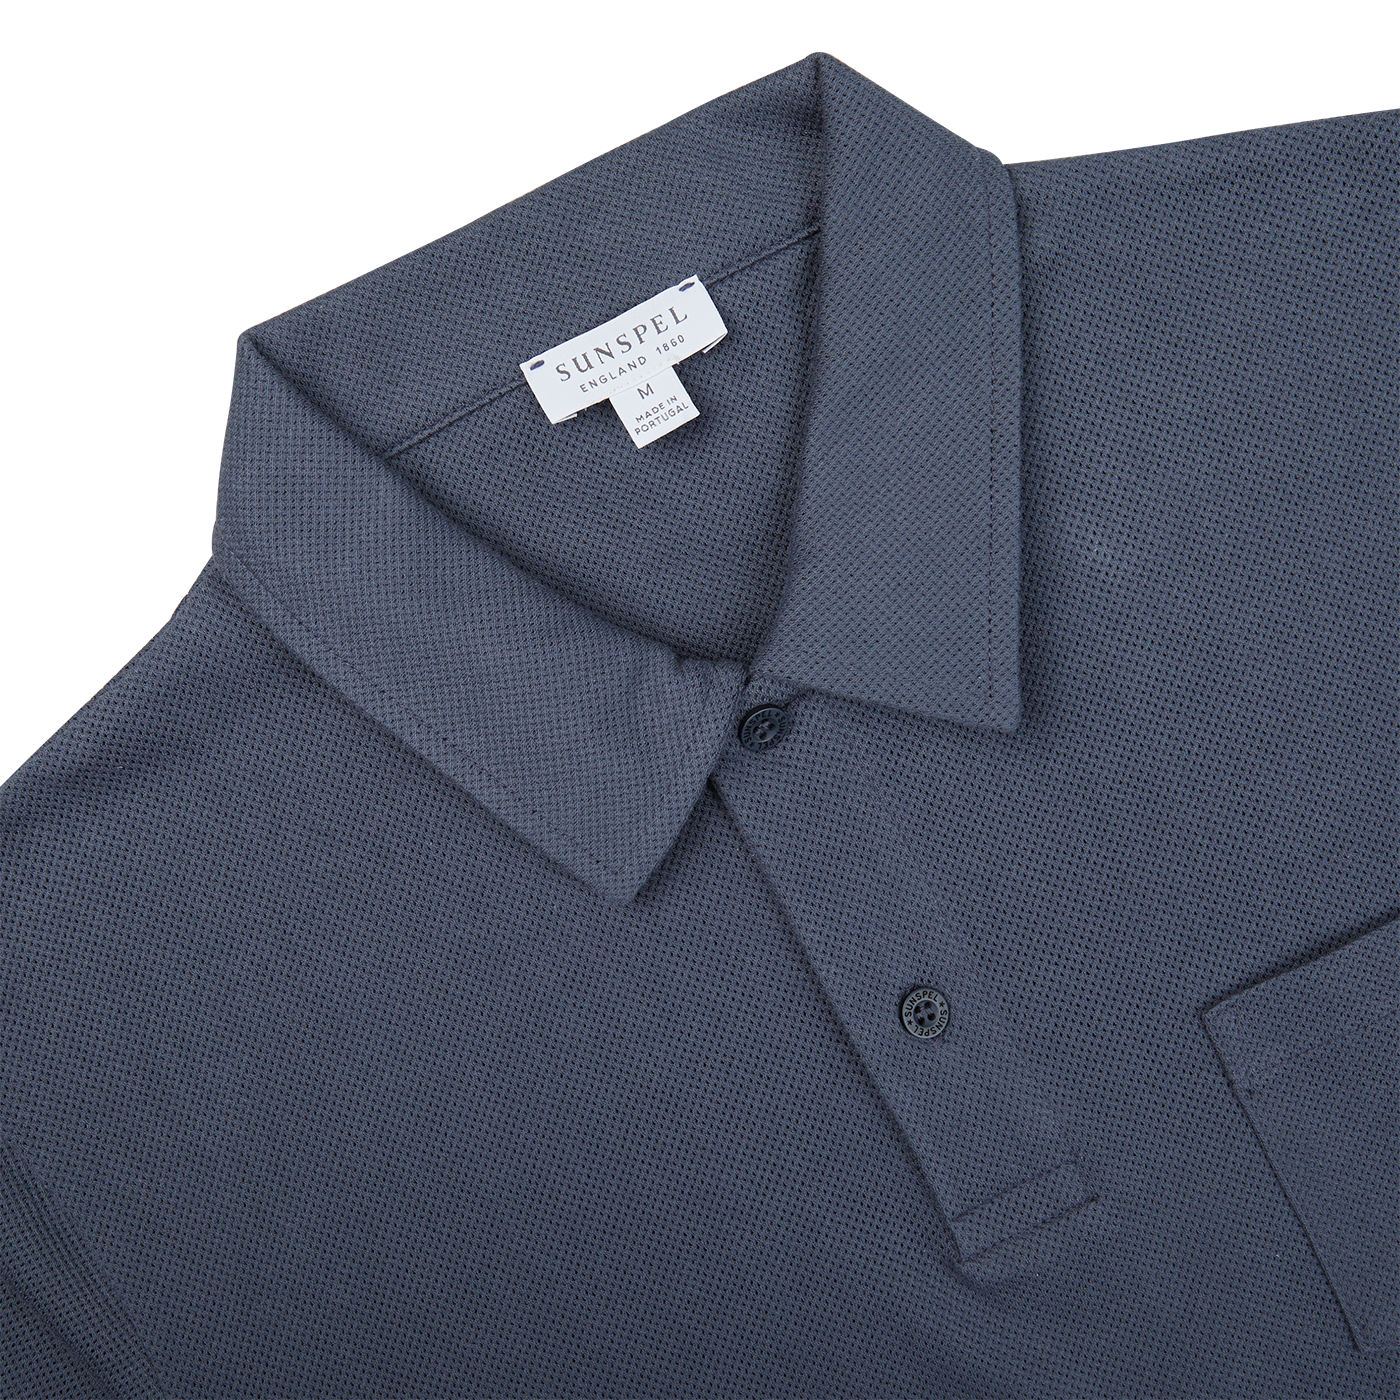 The Sunspel Slate Blue Cotton Riviera Polo Shirt inspired by James Bond in navy for men.